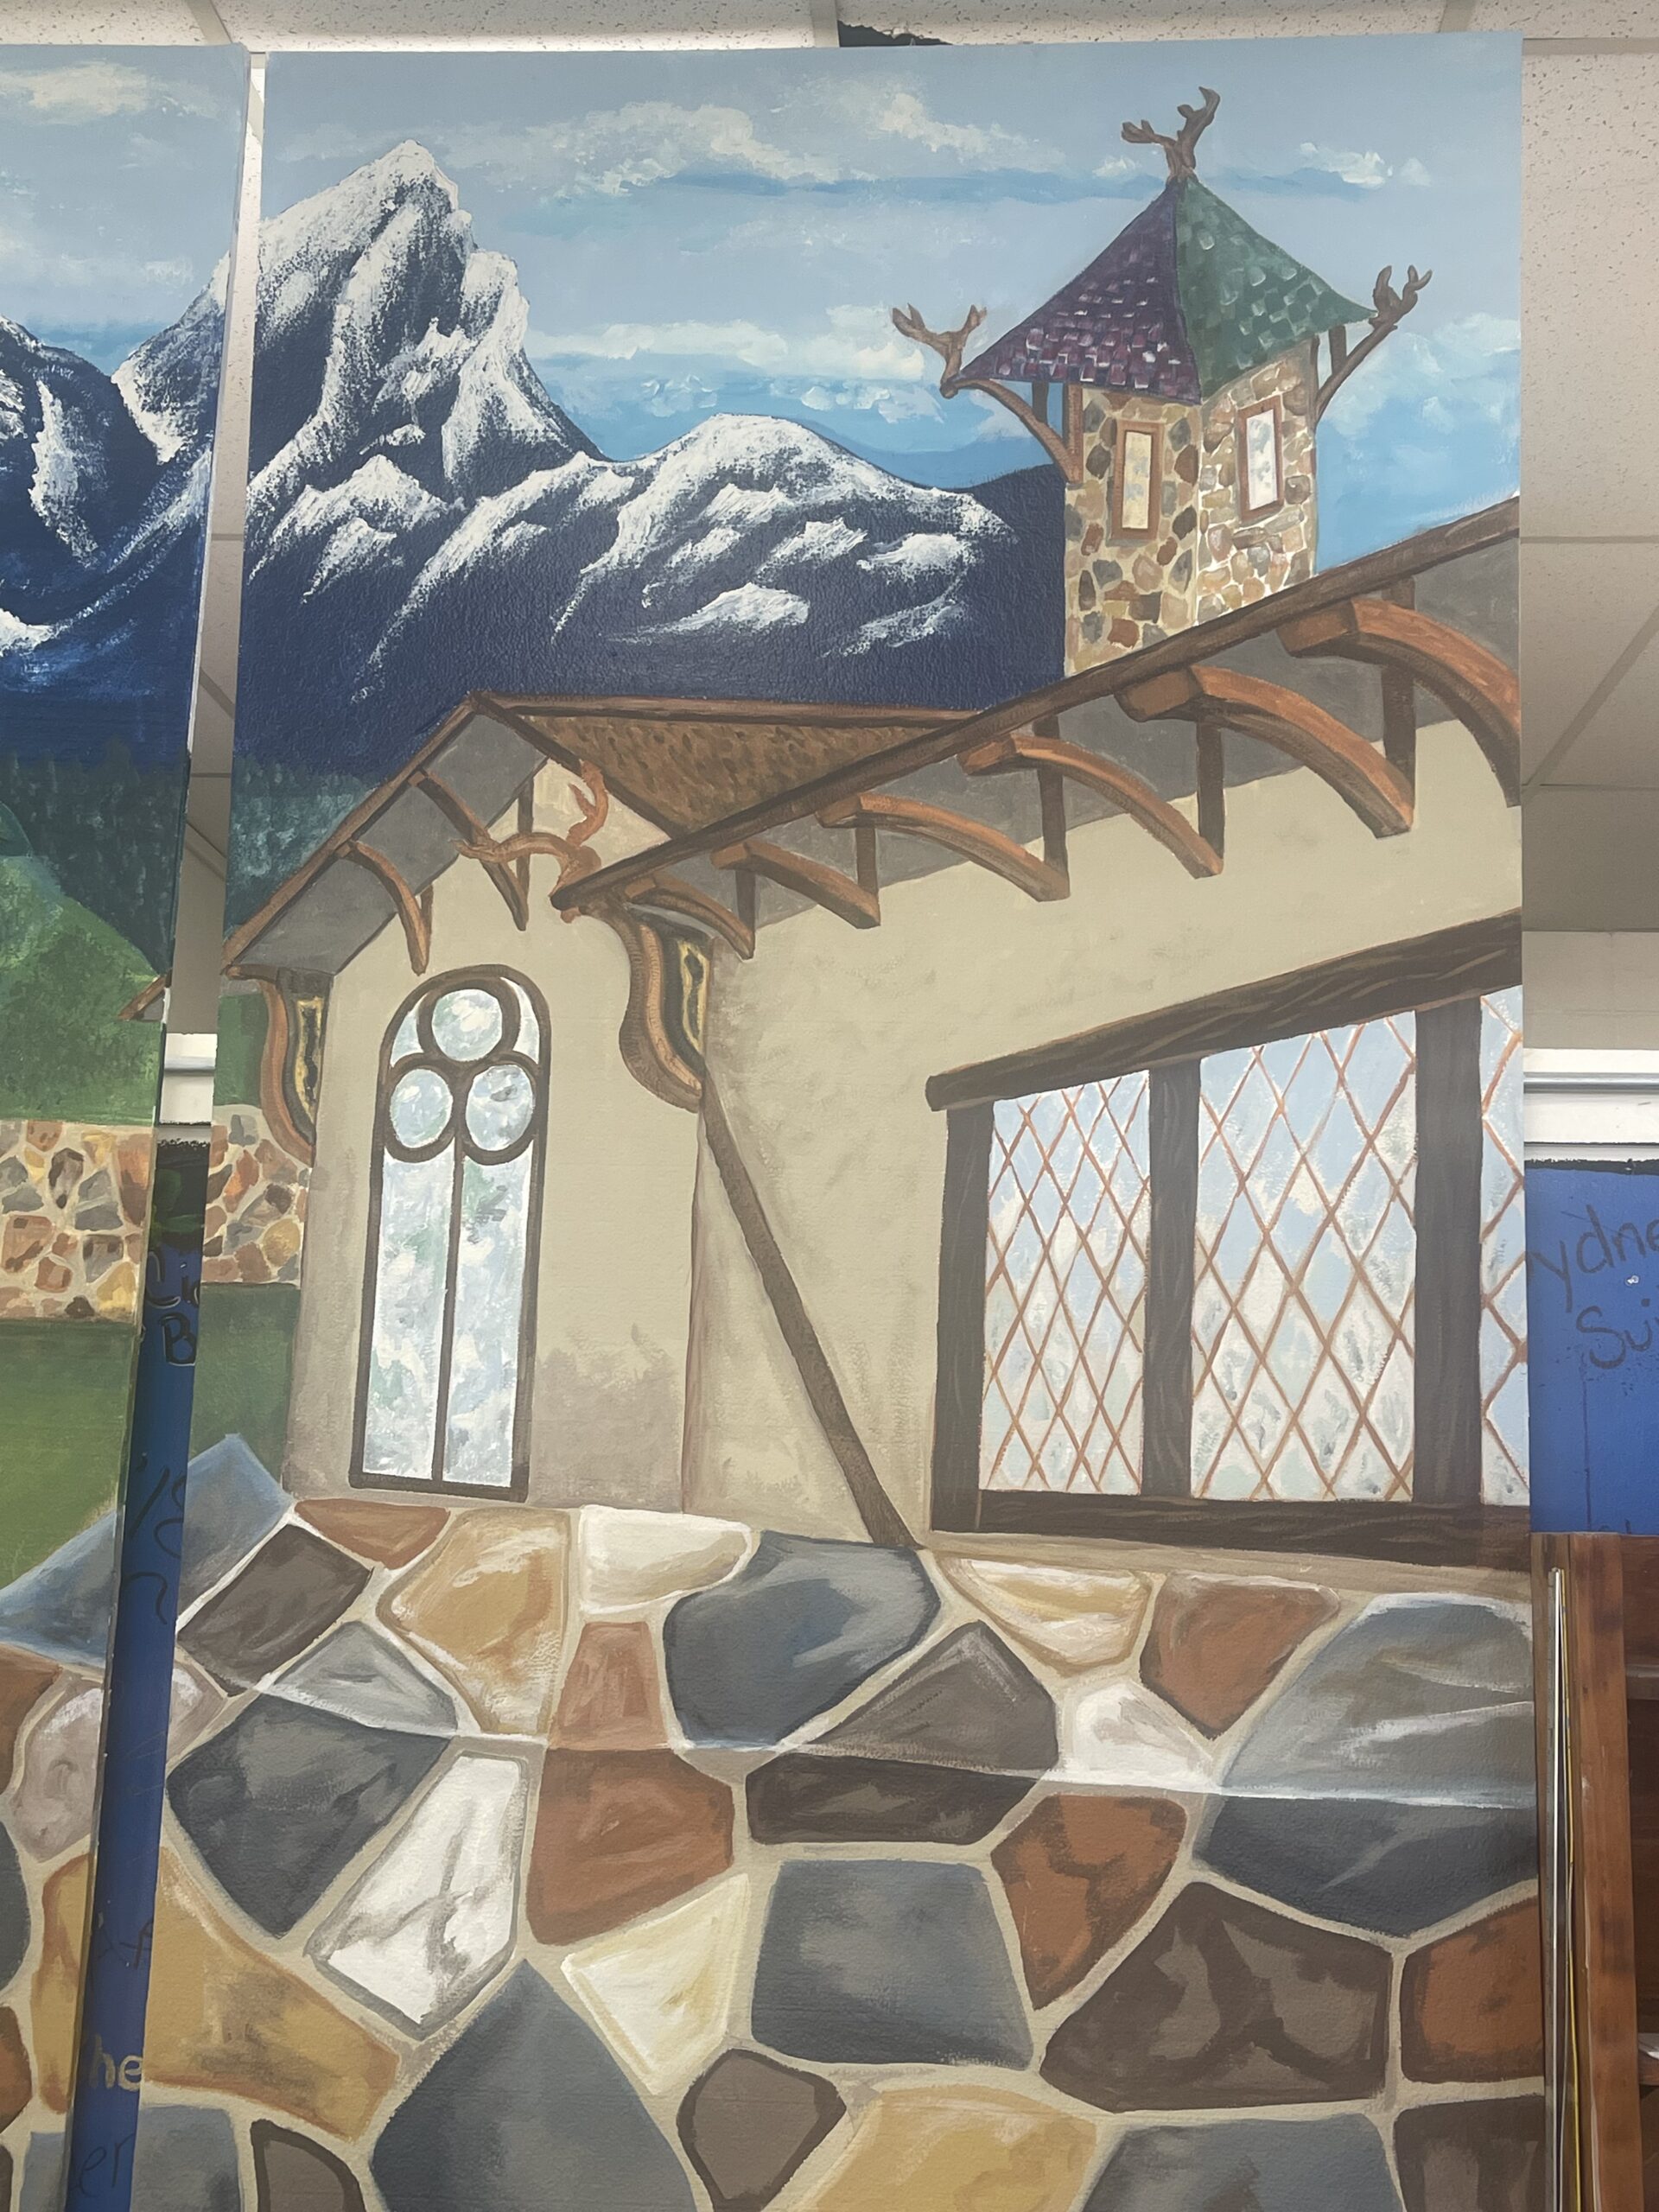 theatrical set backdrop painted with landscape of a nordic village and mountains.